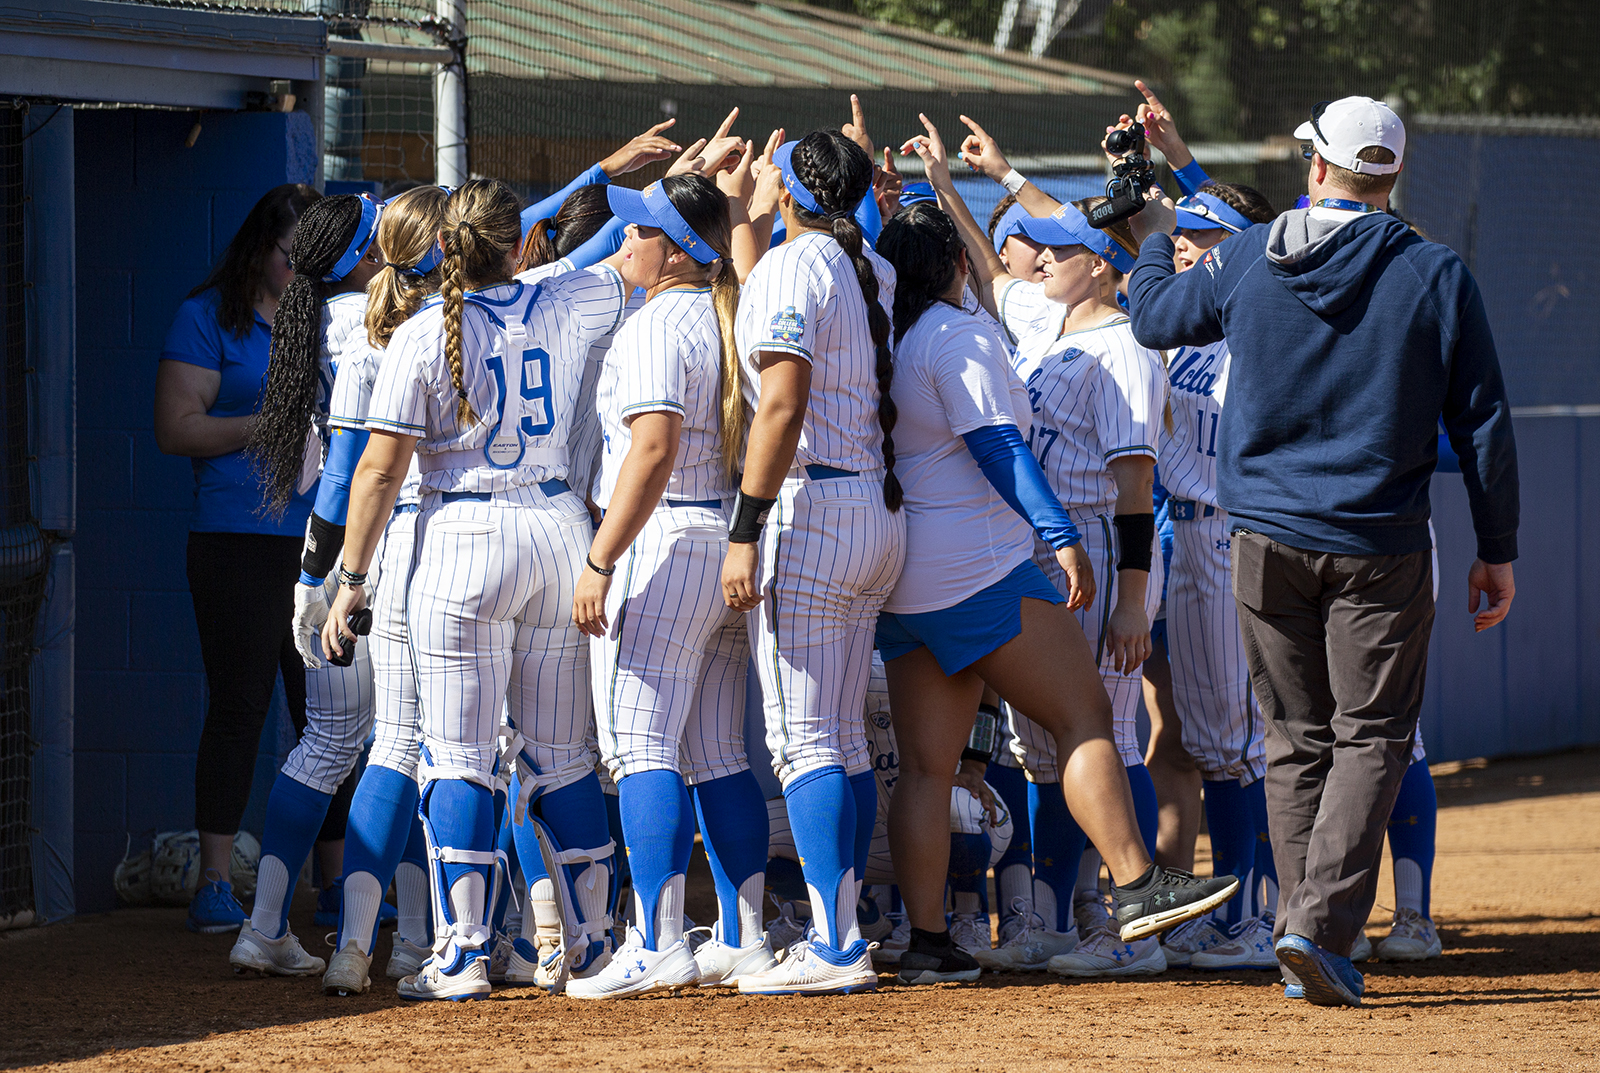 With undefeated record, UCLA softball continues tradition of strong